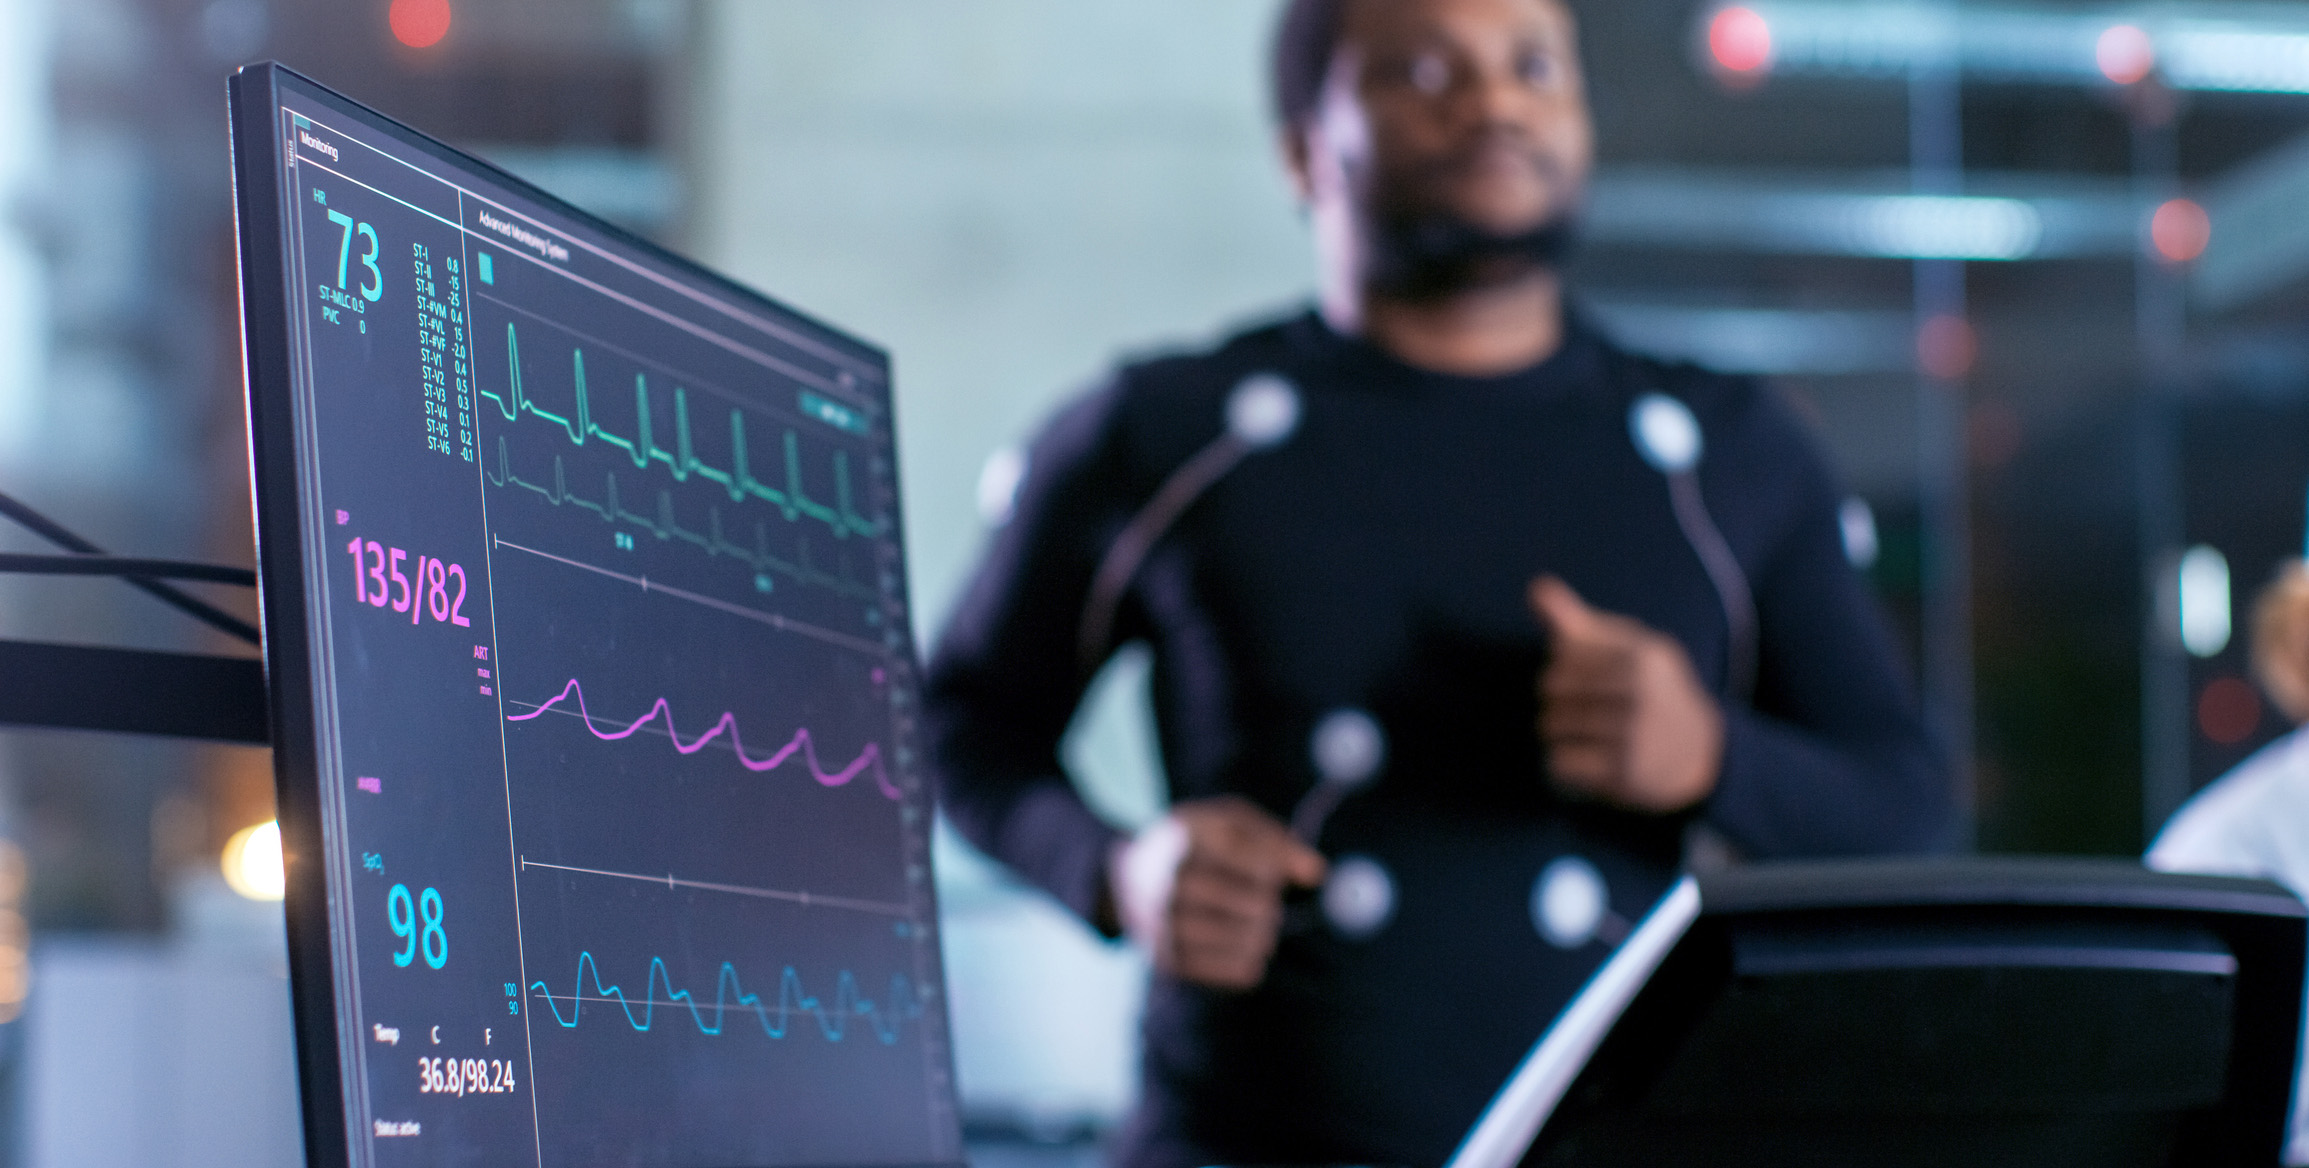 Blurred image of a man on a treadmill with electrodes attached and connected to a heart monitor in a research lab